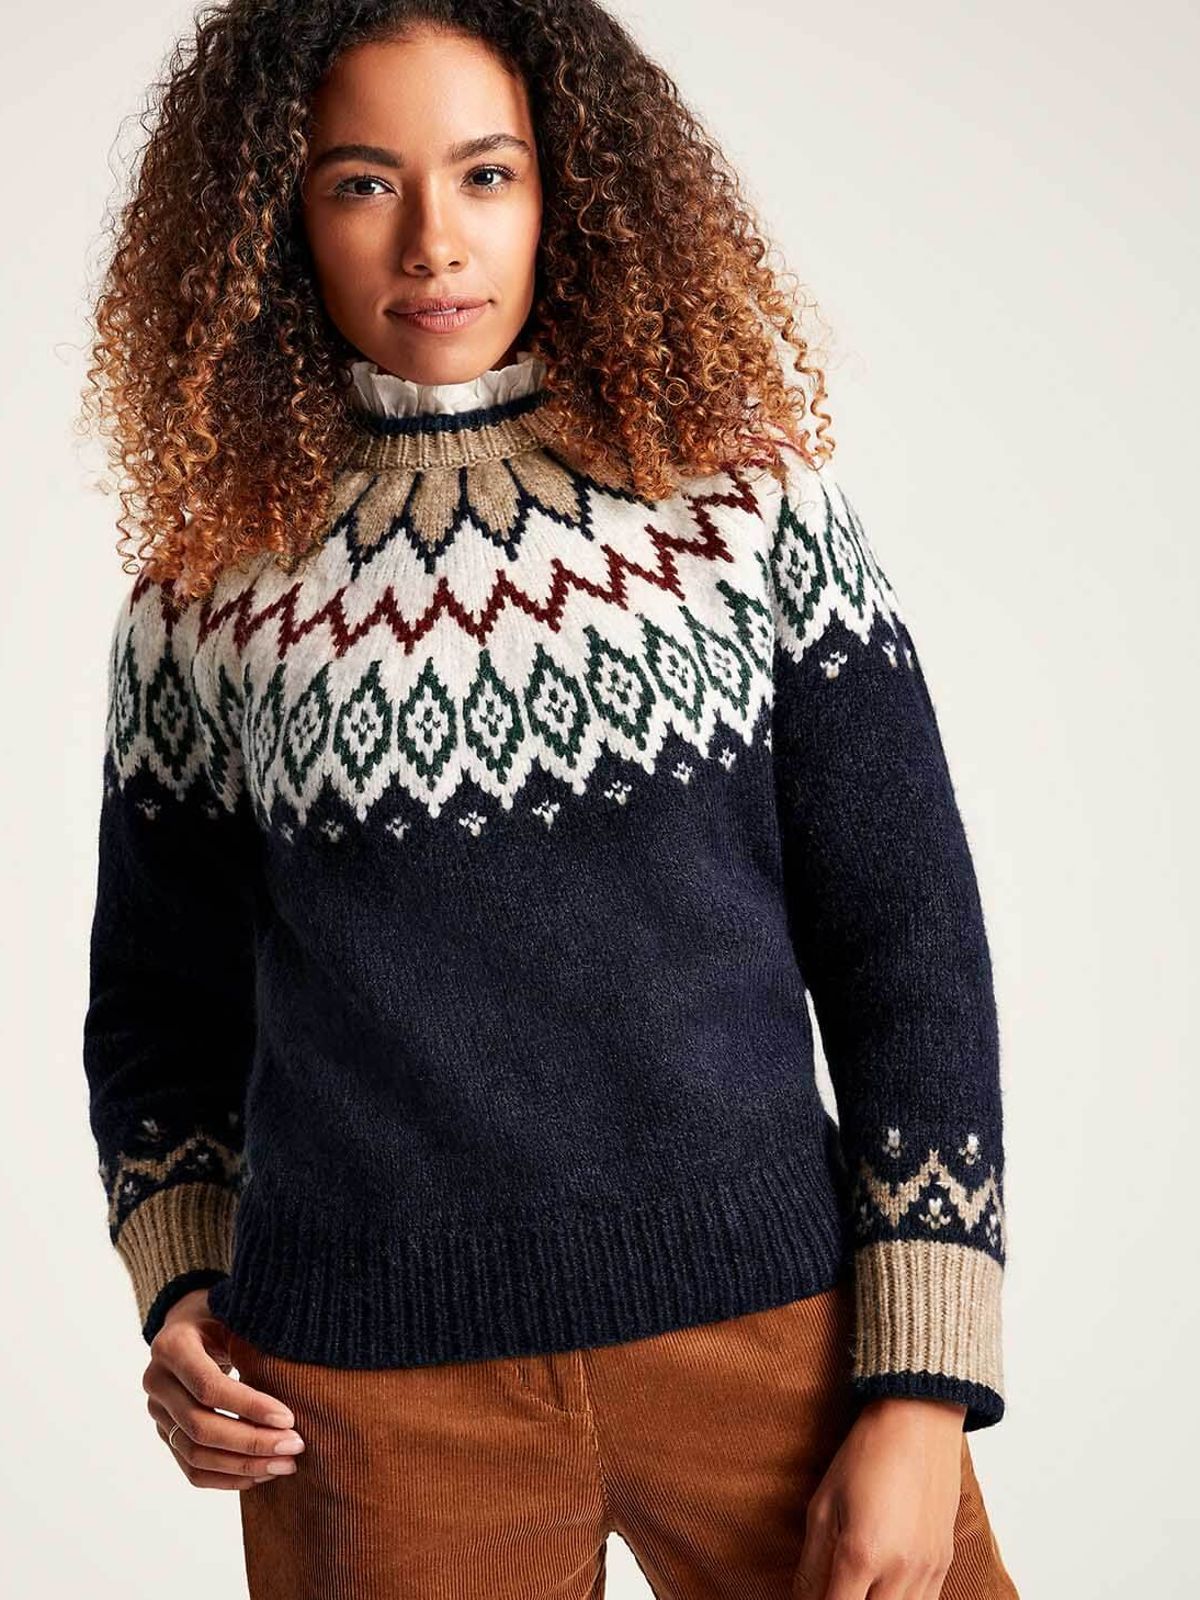 Women’s Clothing | Women’s Country Clothing | Joules